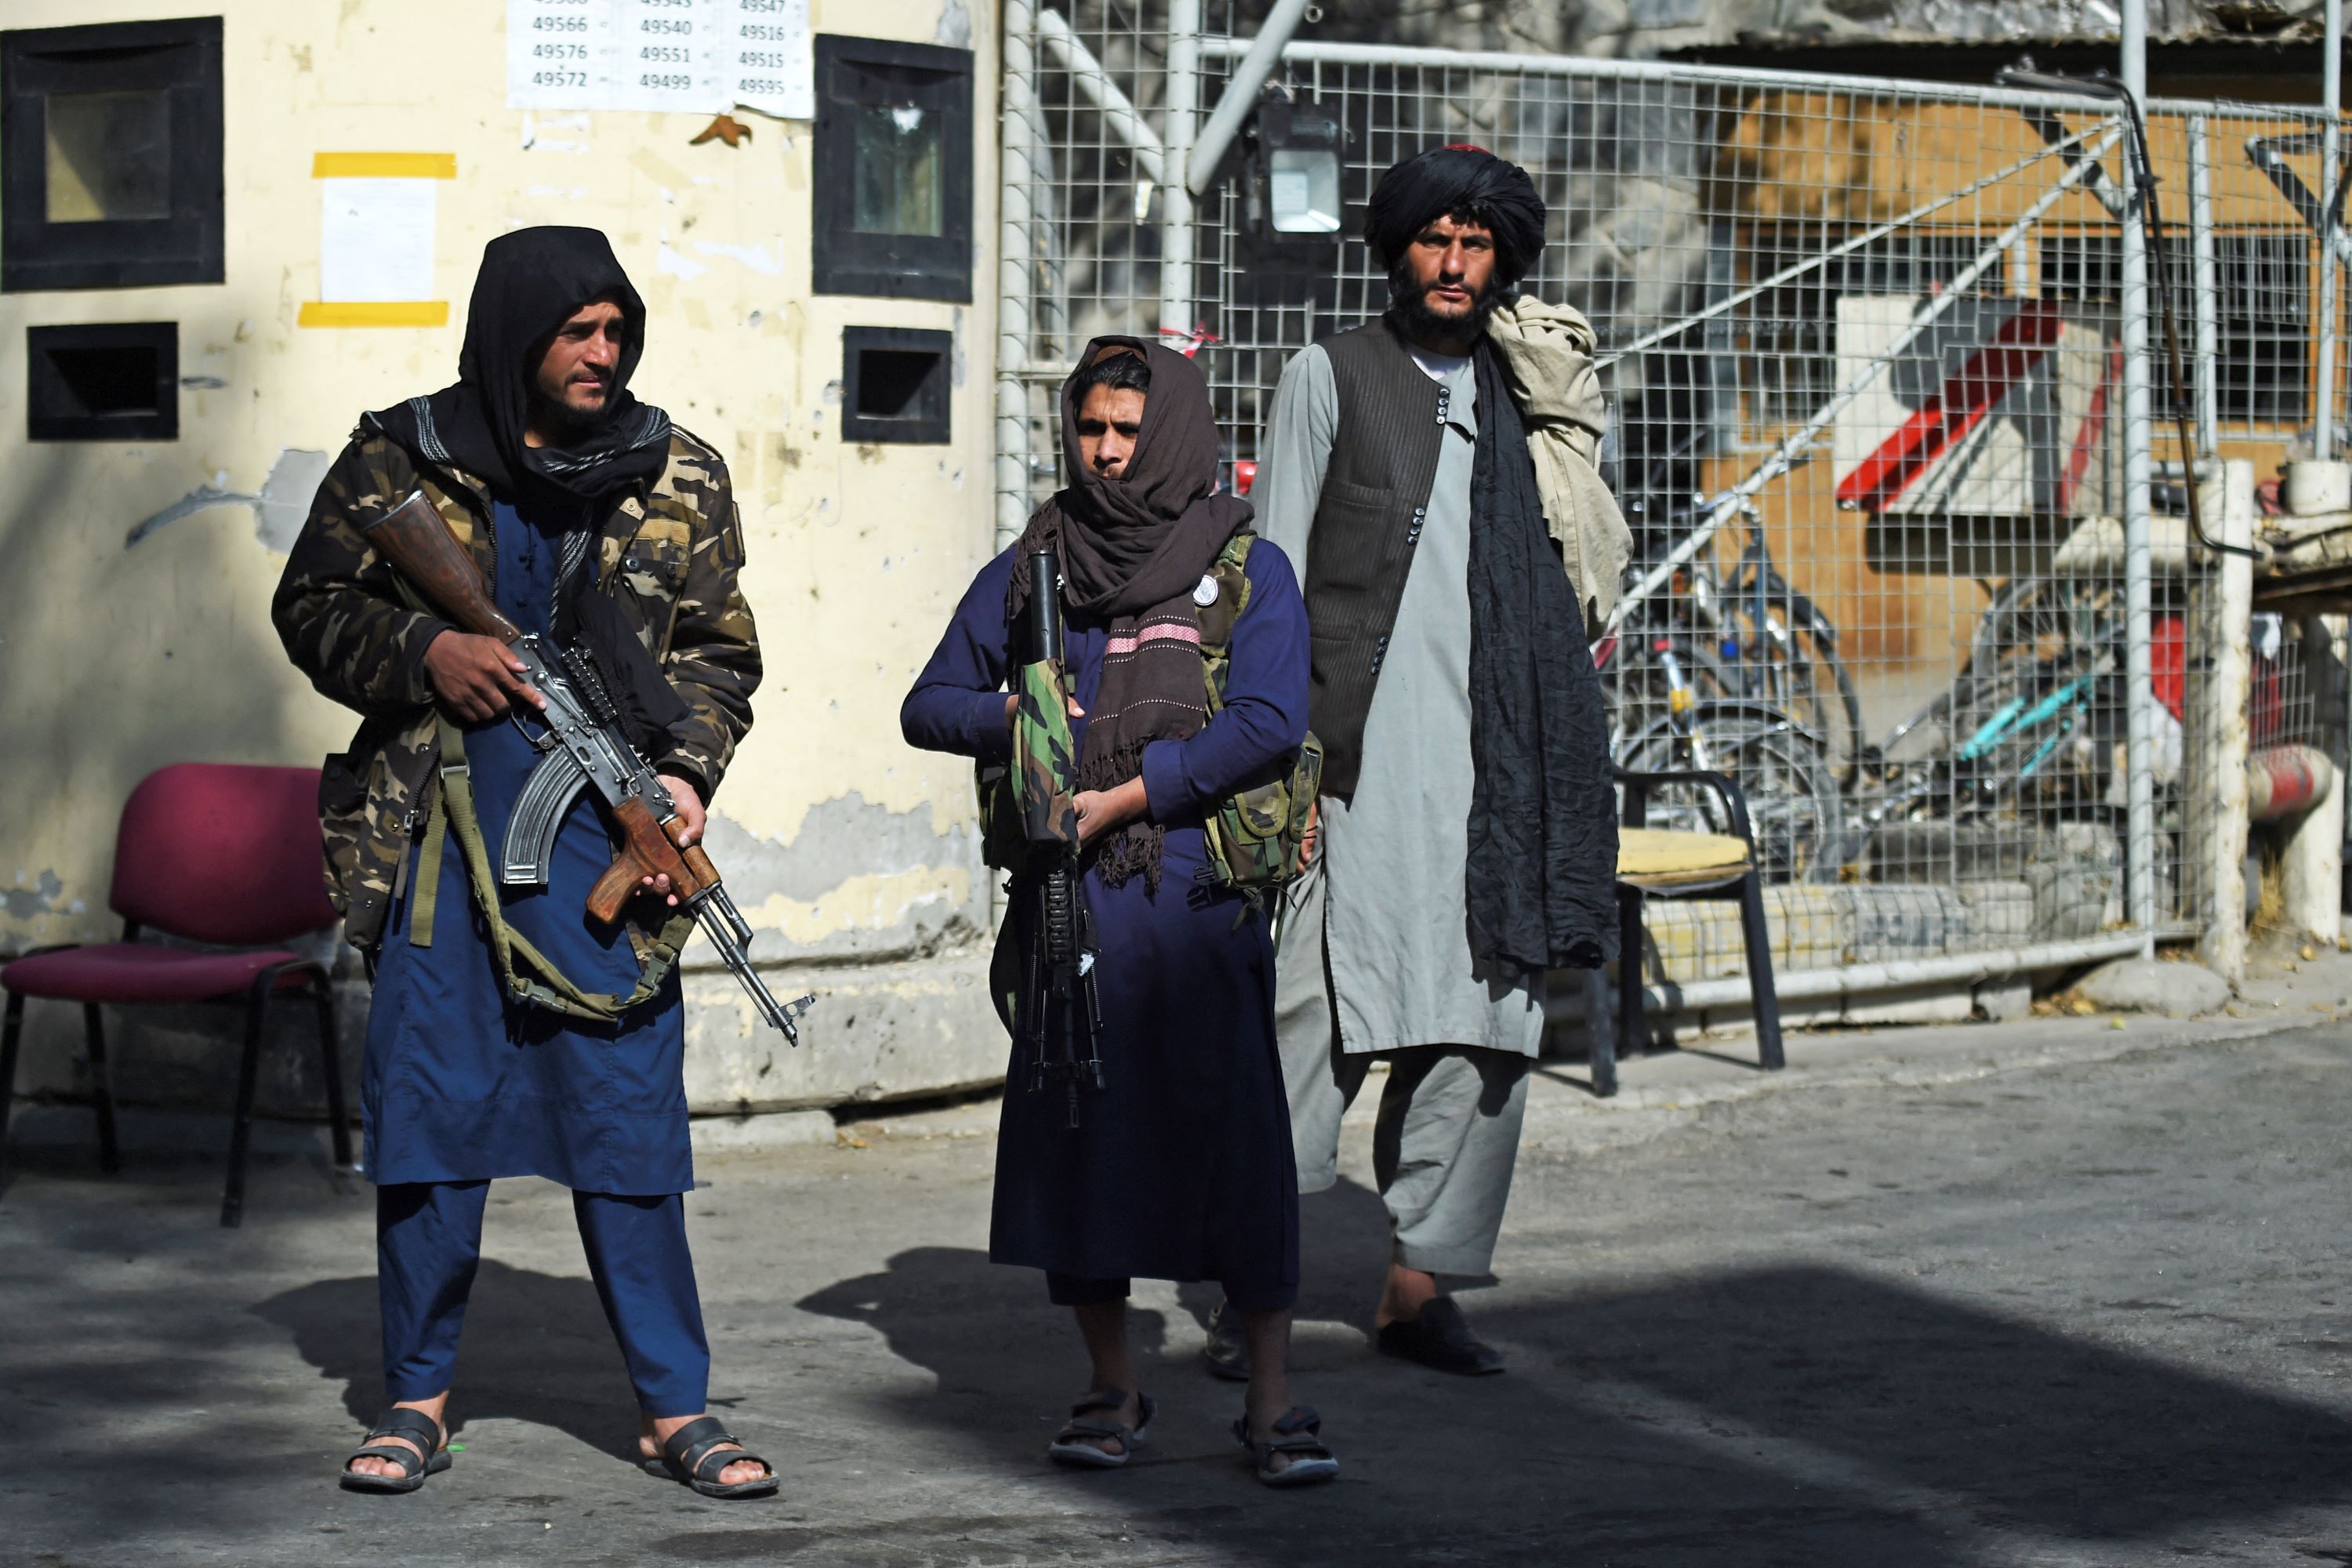 Taliban fighters stand guard at an entrance gate of the Sardar Mohammad Dawood Khan military hospital in Kabul on November 3, 2021, a day after an Islamic State attack (AFP)